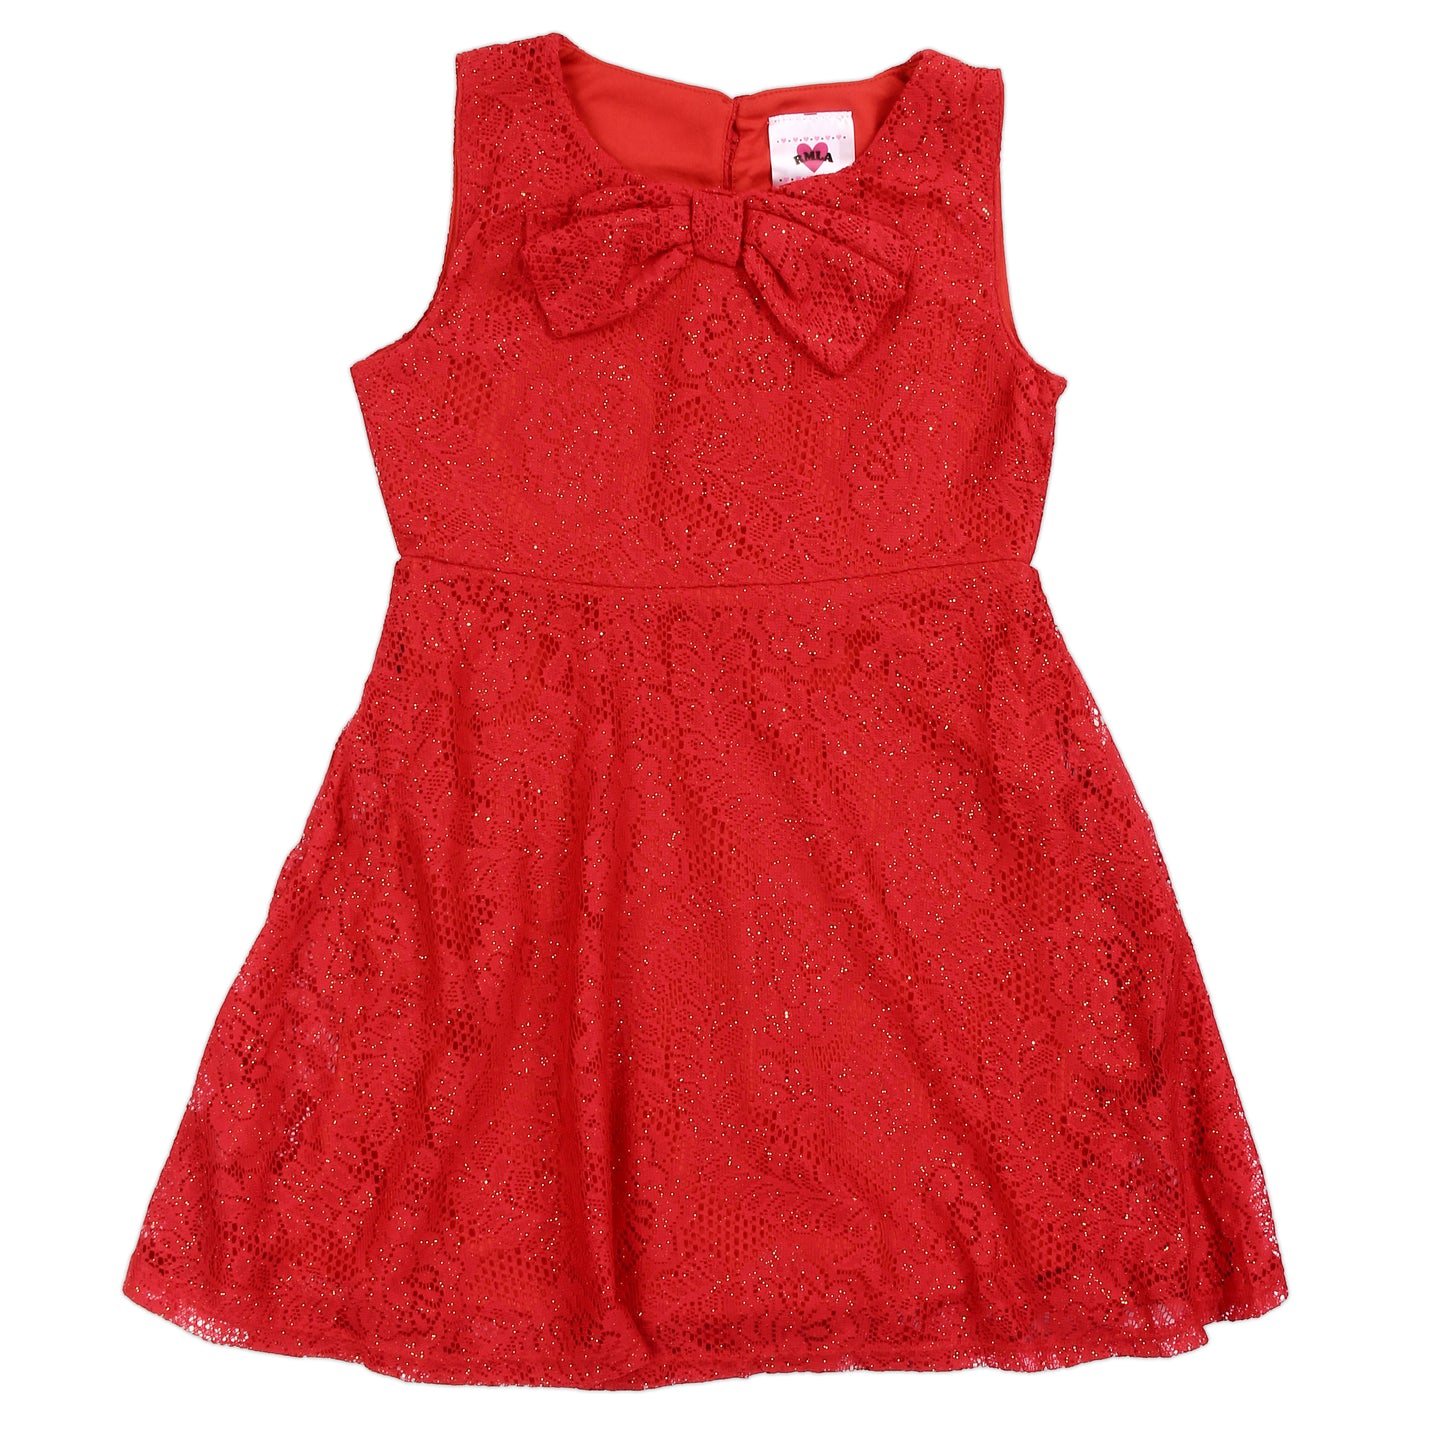 RMLA Girls 4-6X Bow Front Glitter Lace Dress (Pack of 6)